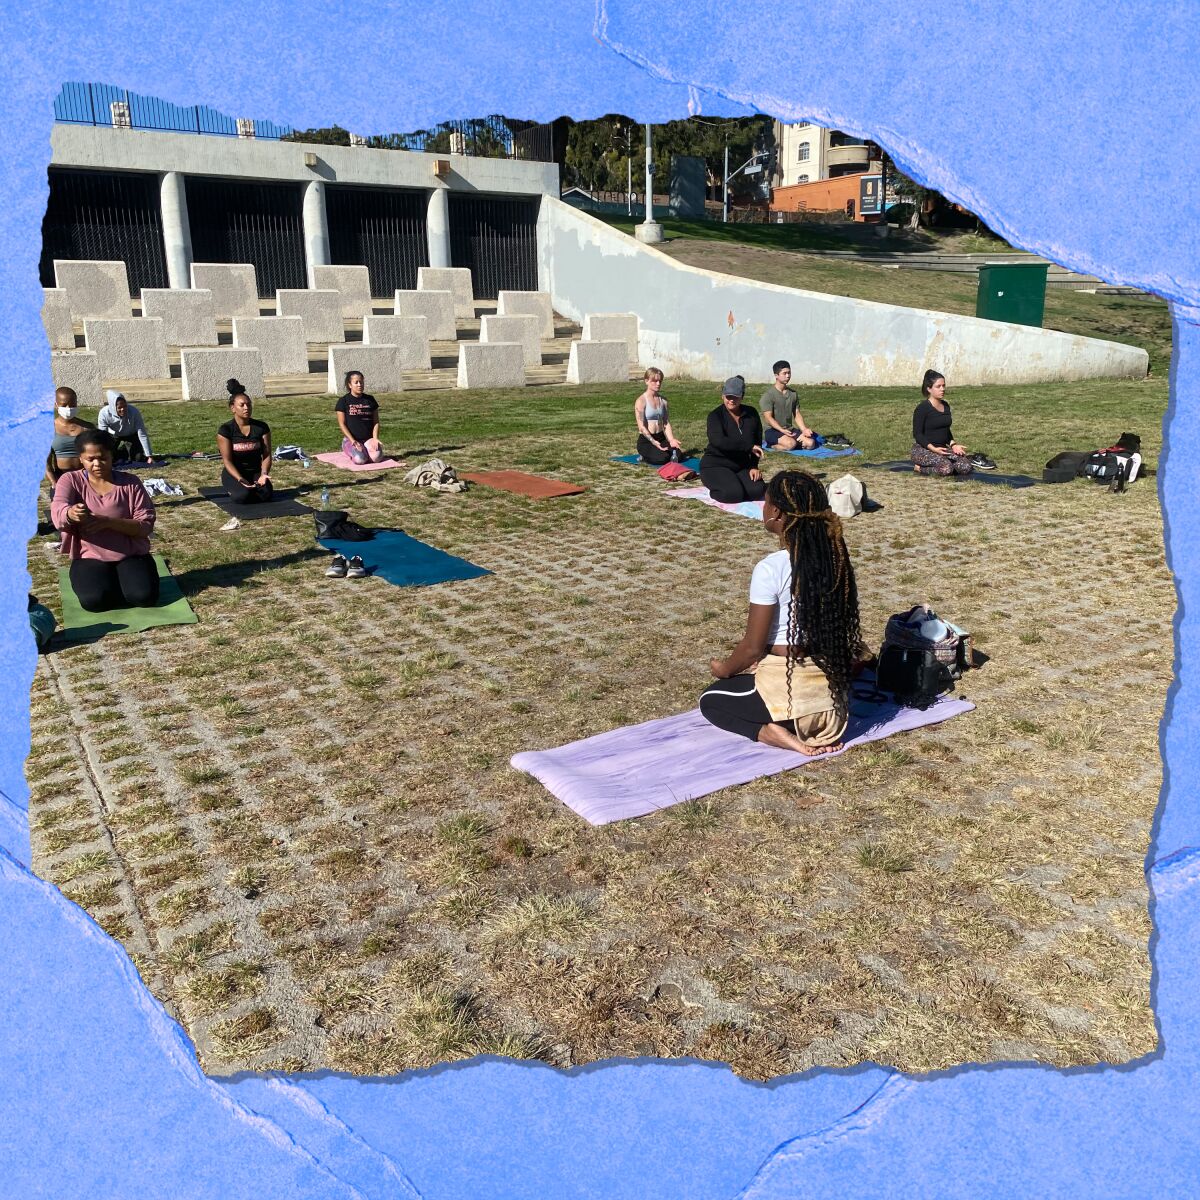 People sit outdoors on yoga mats.